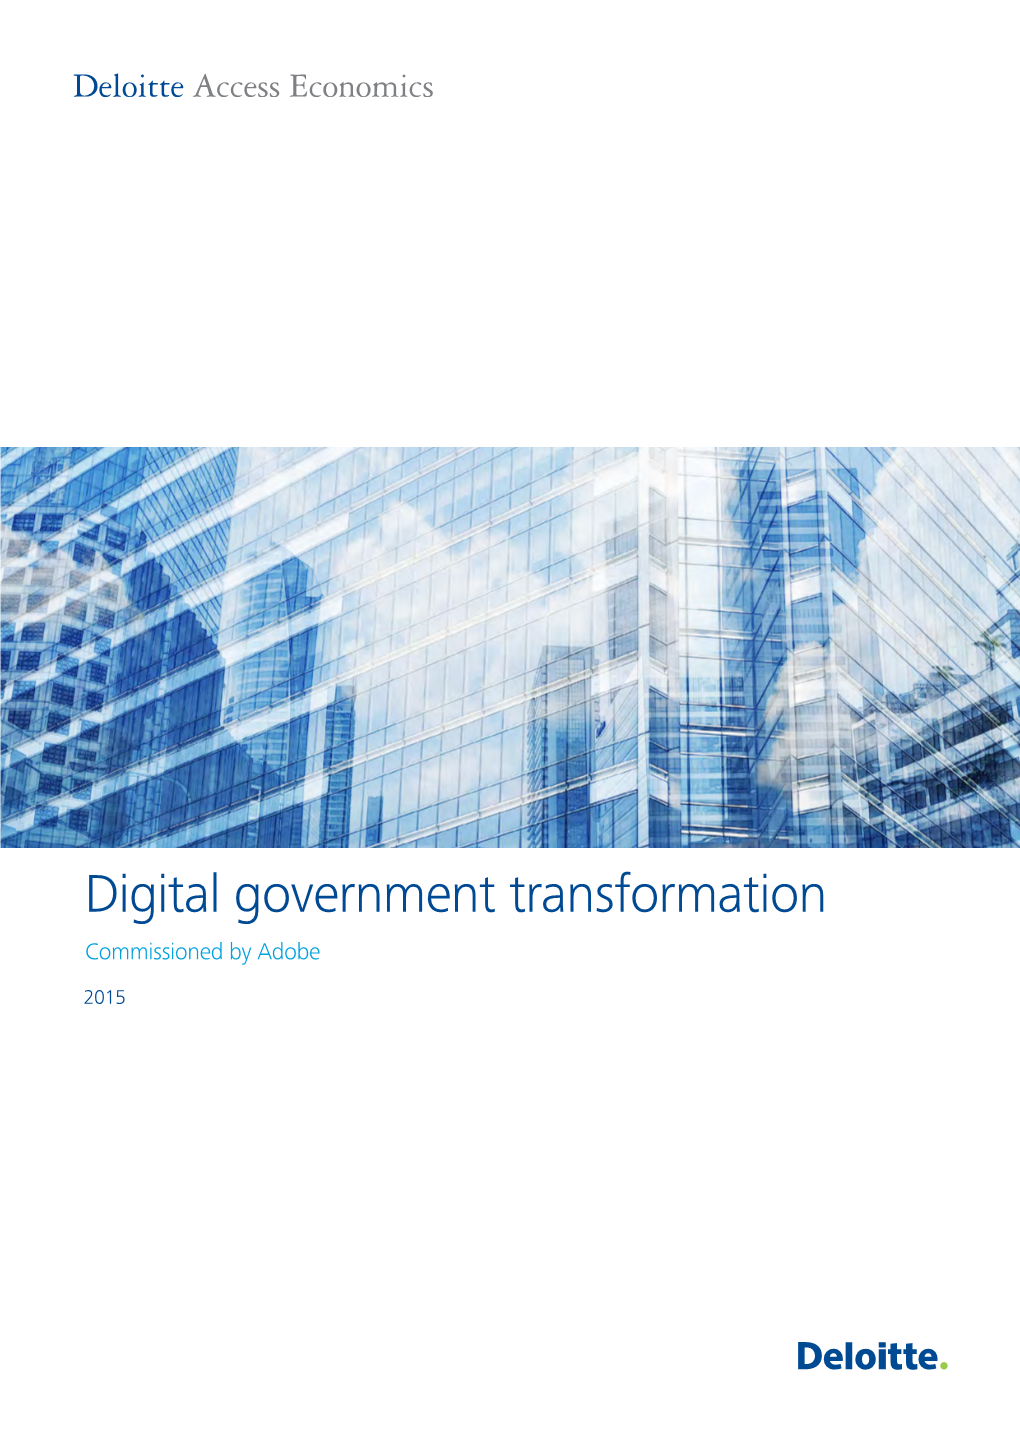 Digital Government Transformation Commissioned by Adobe